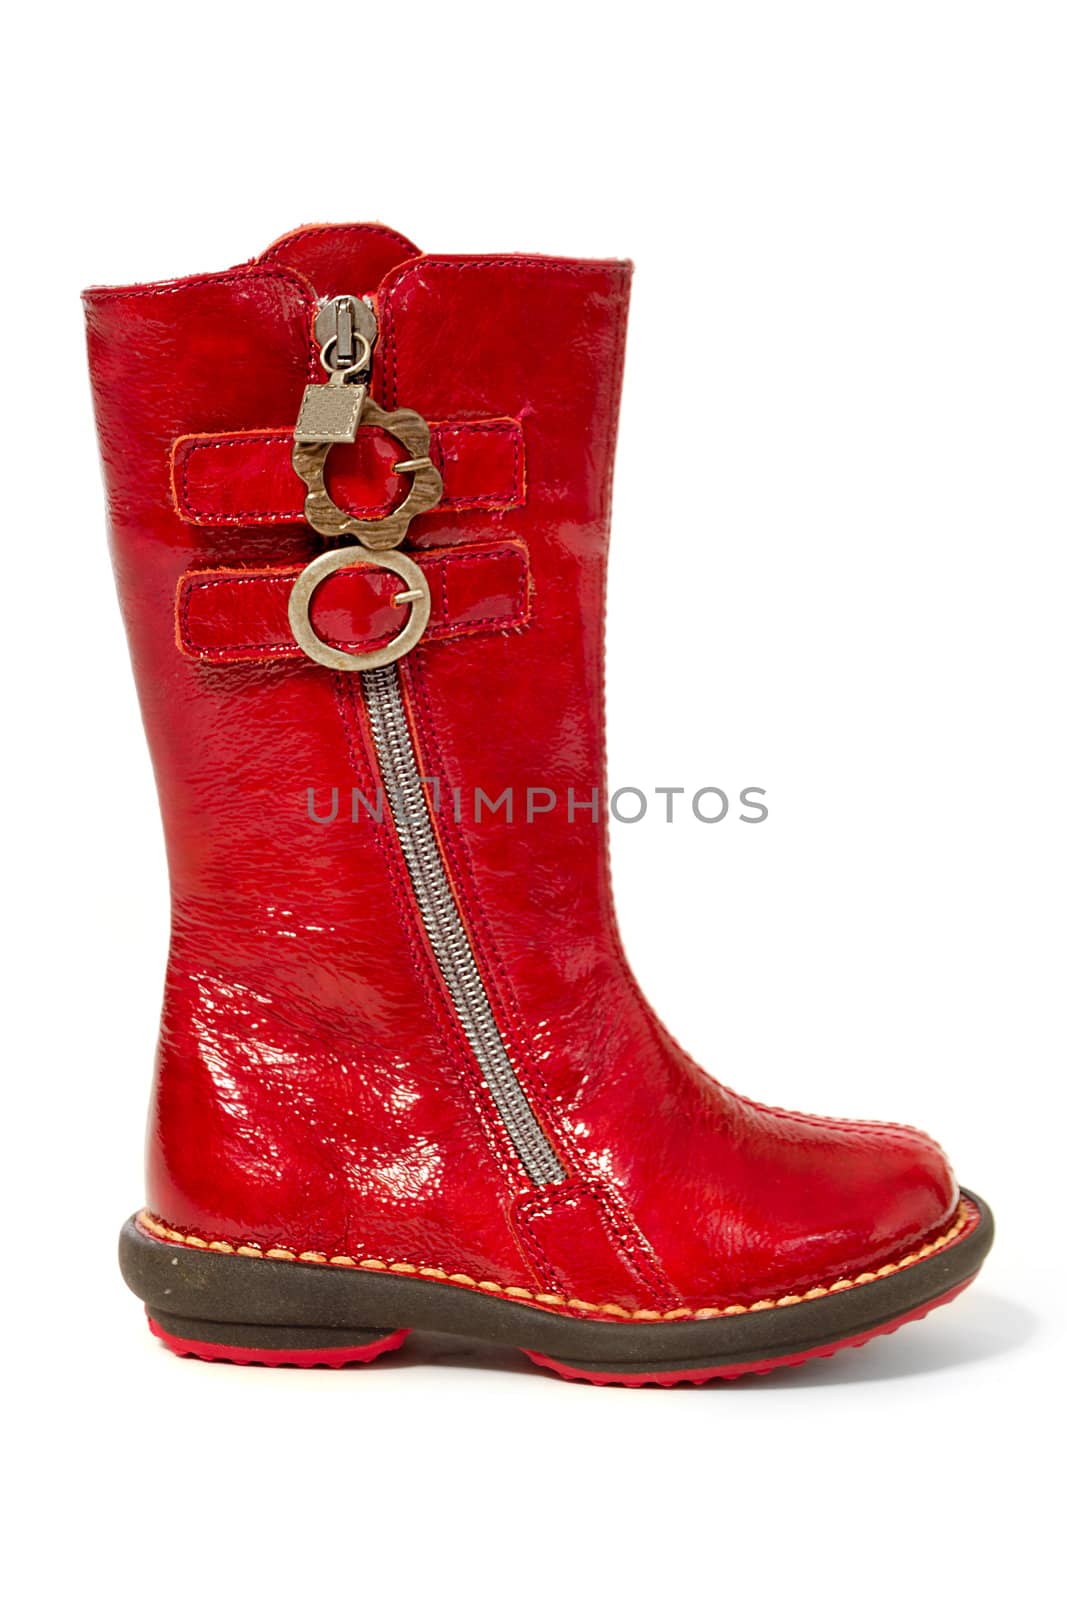 A red boot. Taken on a white background.